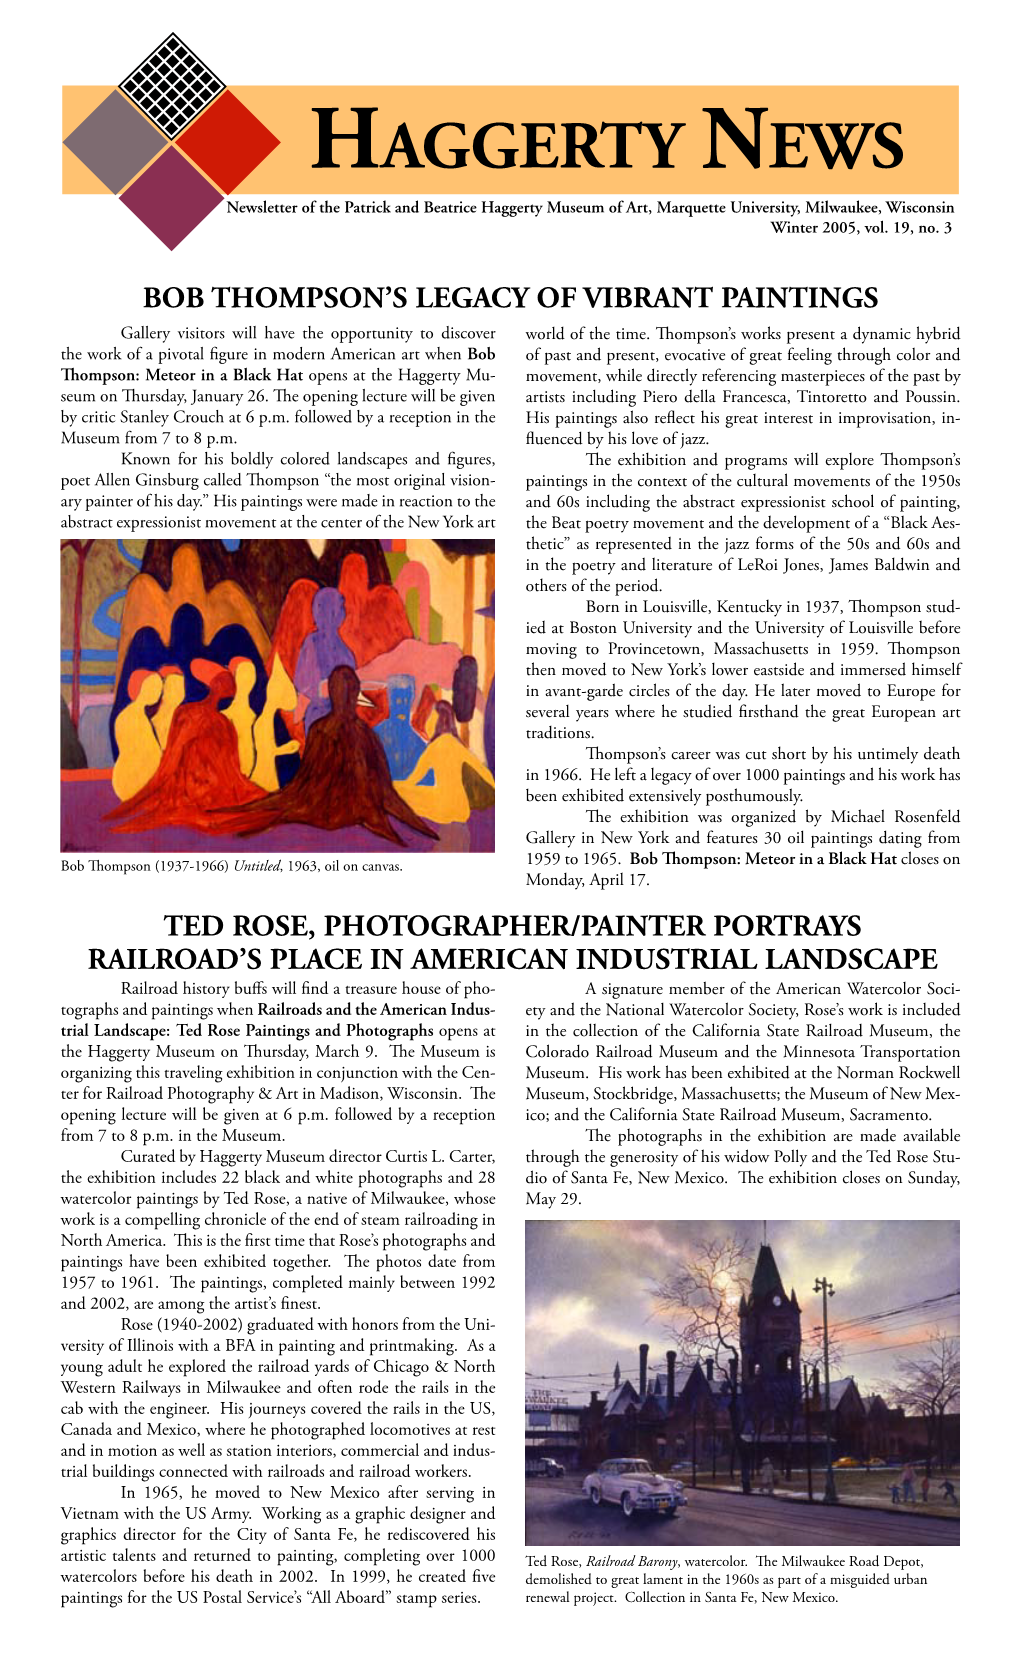 HAGGERTY NEWS Newsletter of the Patrick and Beatrice Haggerty Museum of Art, Marquette University, Milwaukee, Wisconsin Winter 2005, Vol